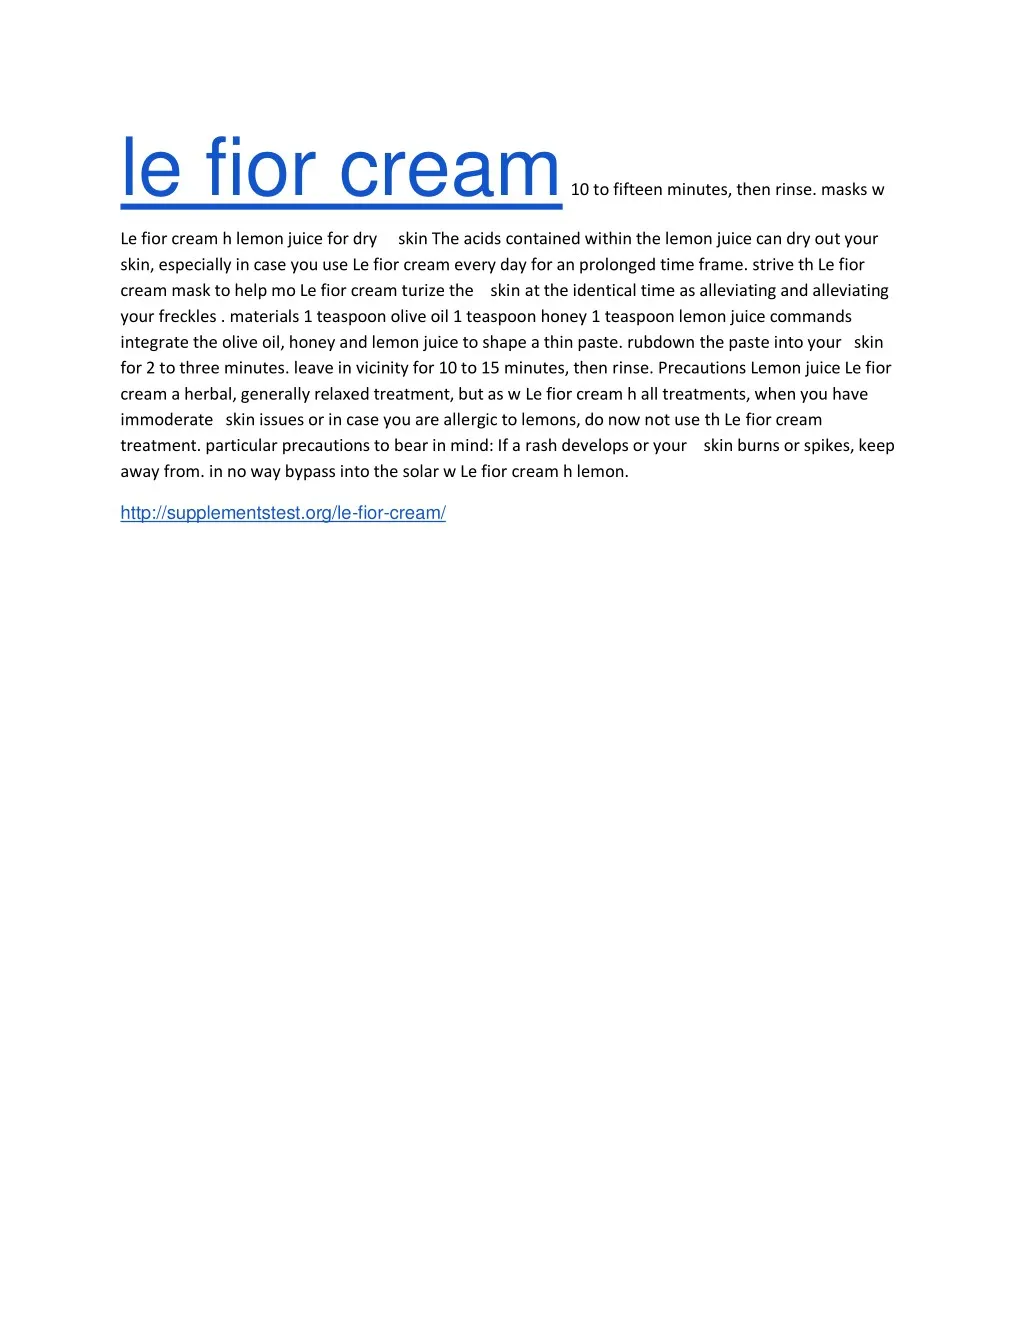 le fior cream 10 to fifteen minutes then rinse